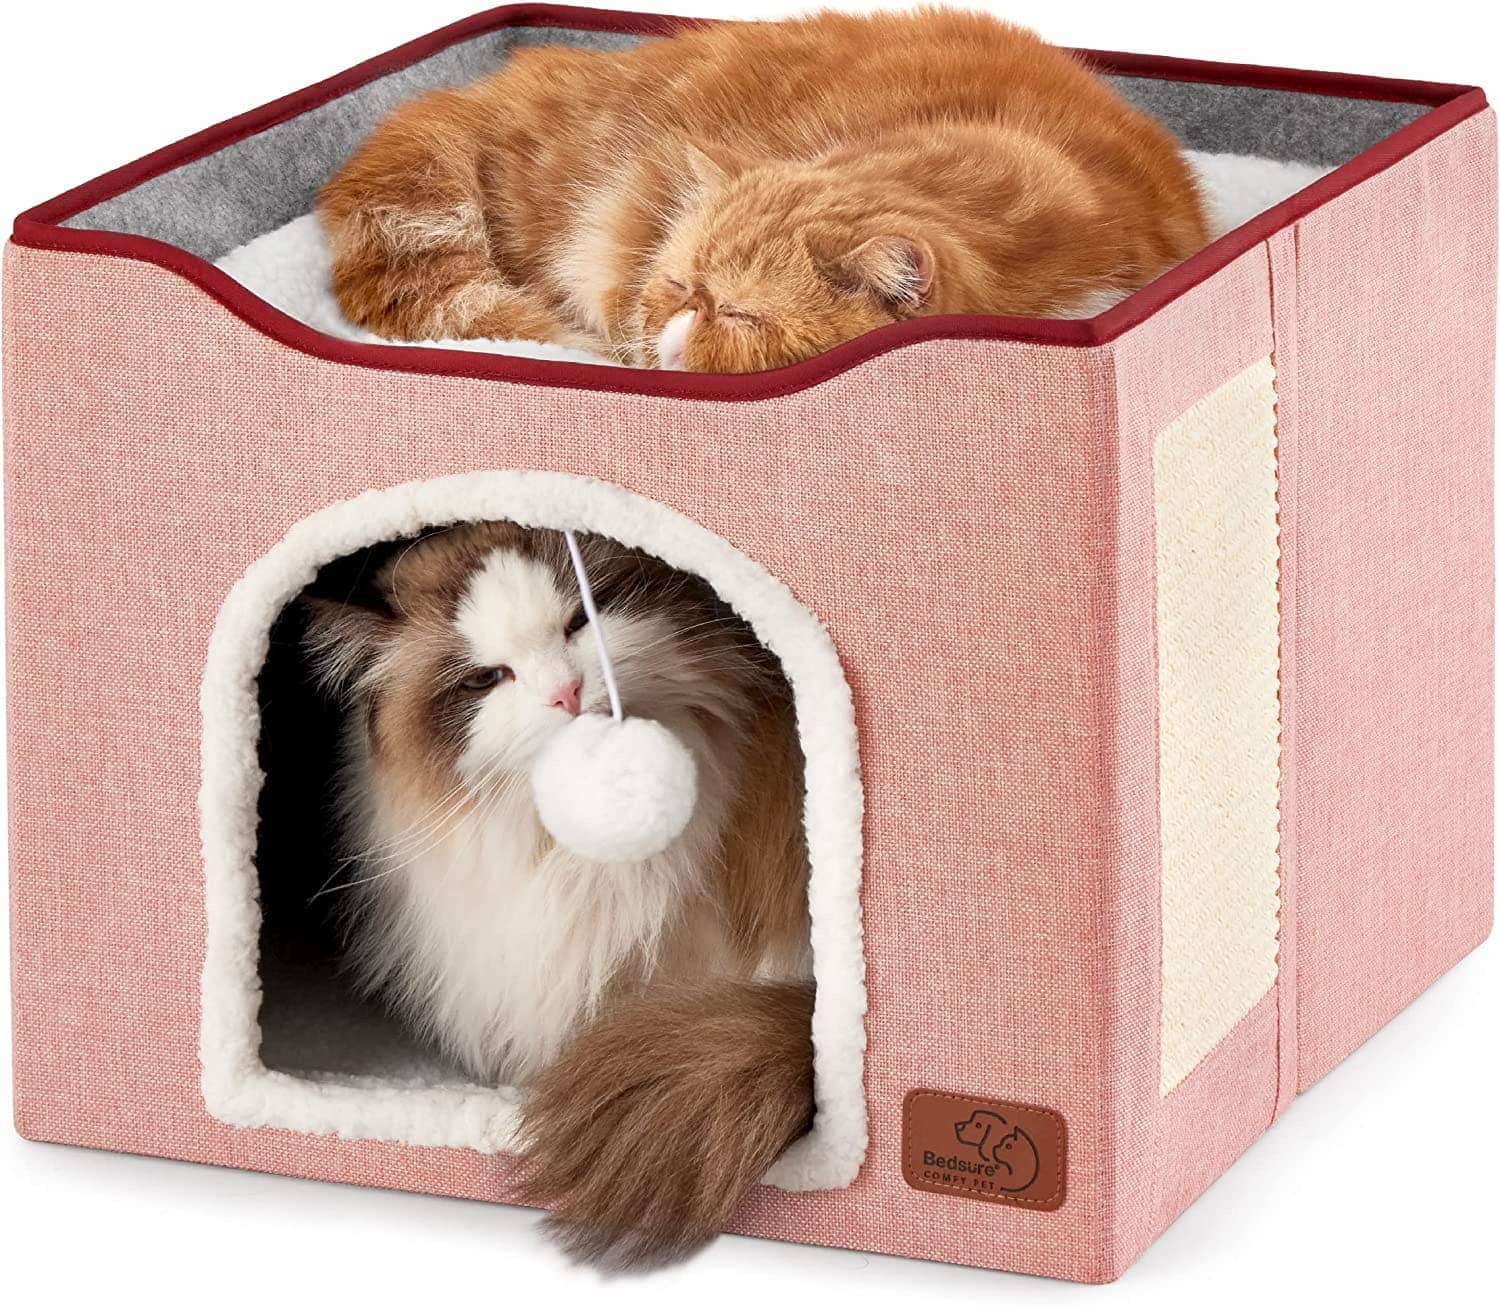 bedsure-cat-beds-for-indoor-cats-large-cat-cave-for-pet-cat-house-with-fluffy-ball-hanging-and-scratch-pad-foldable-cat-hideaway-16-5x16-5x14-inches-brown